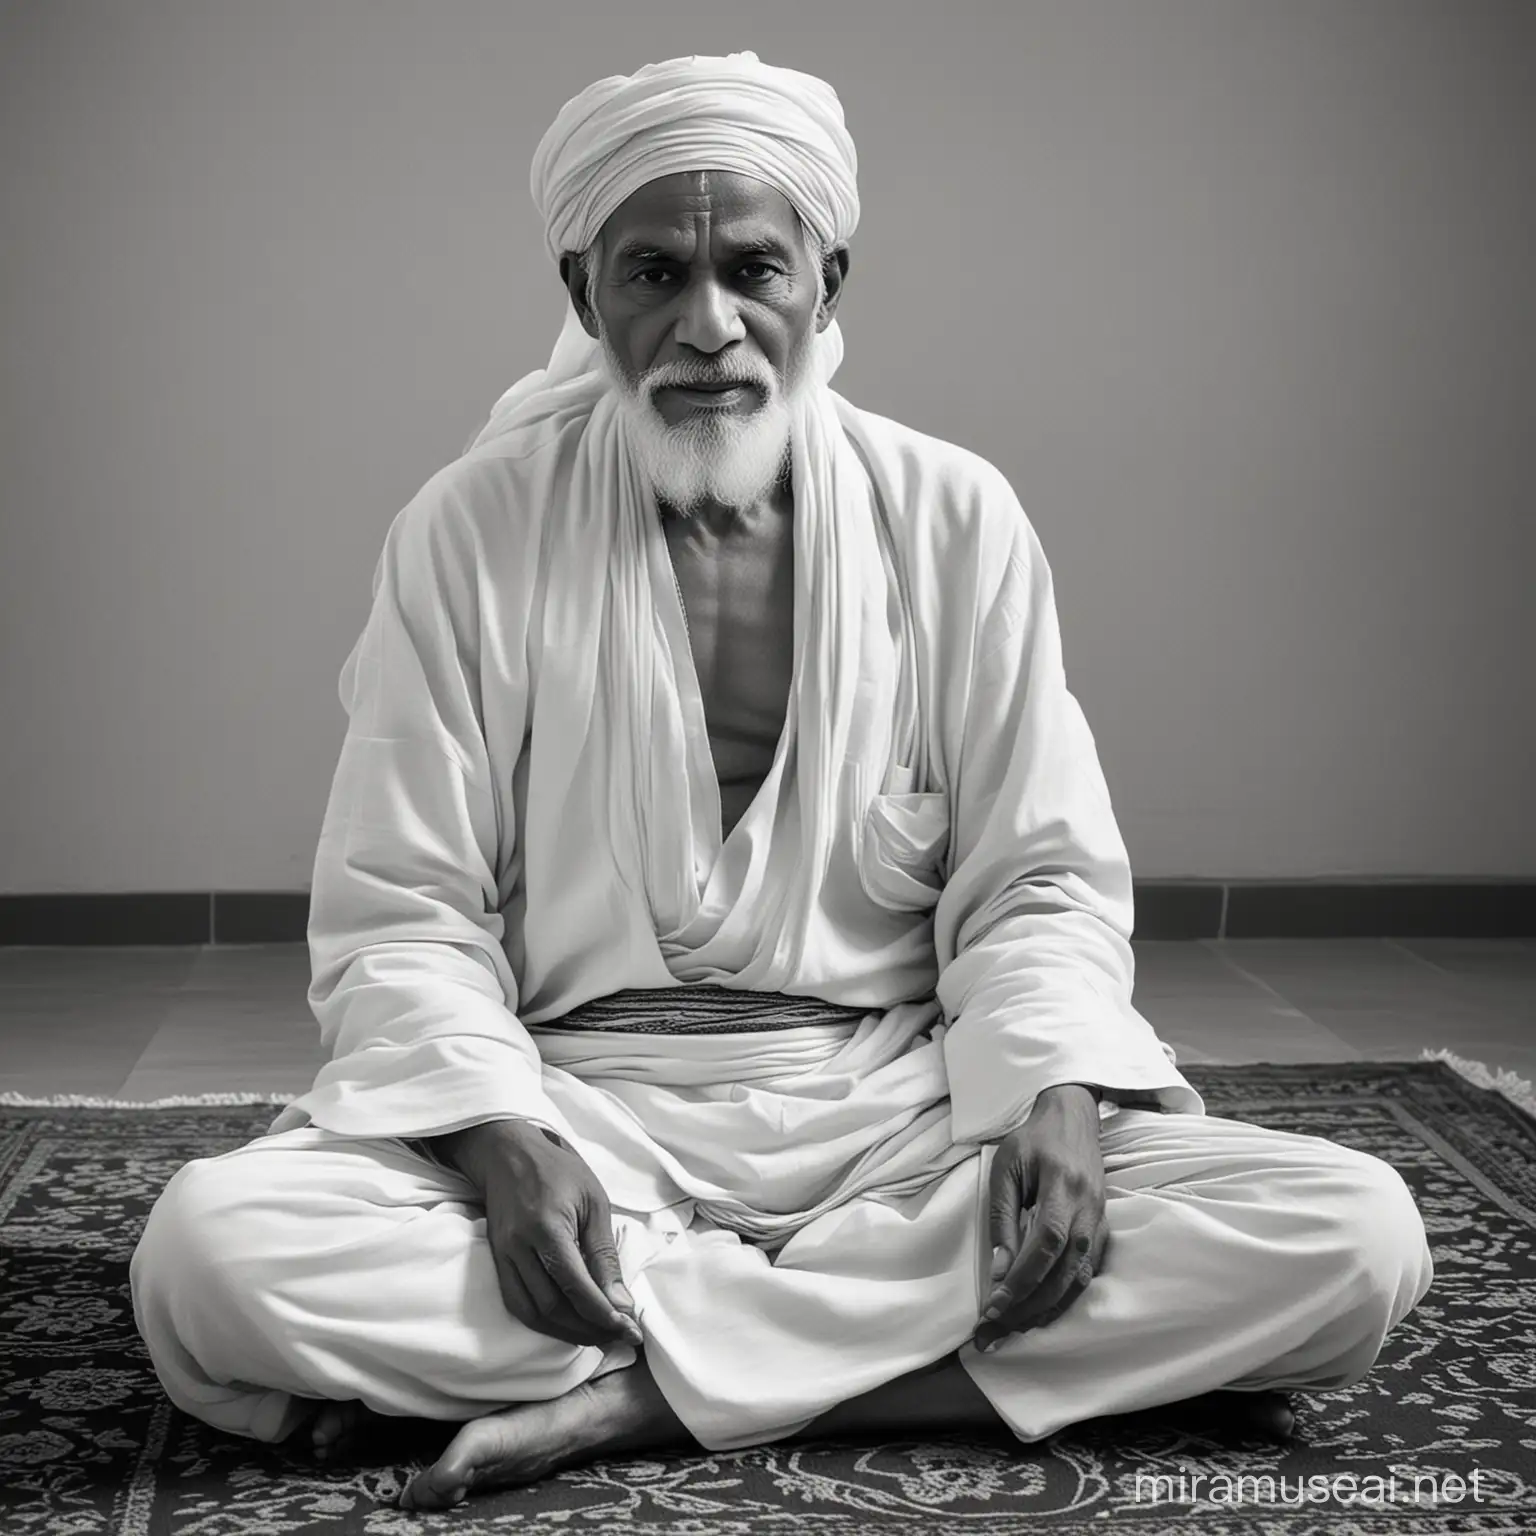 Photo of Sai baba in pagdi while meditating in black and white